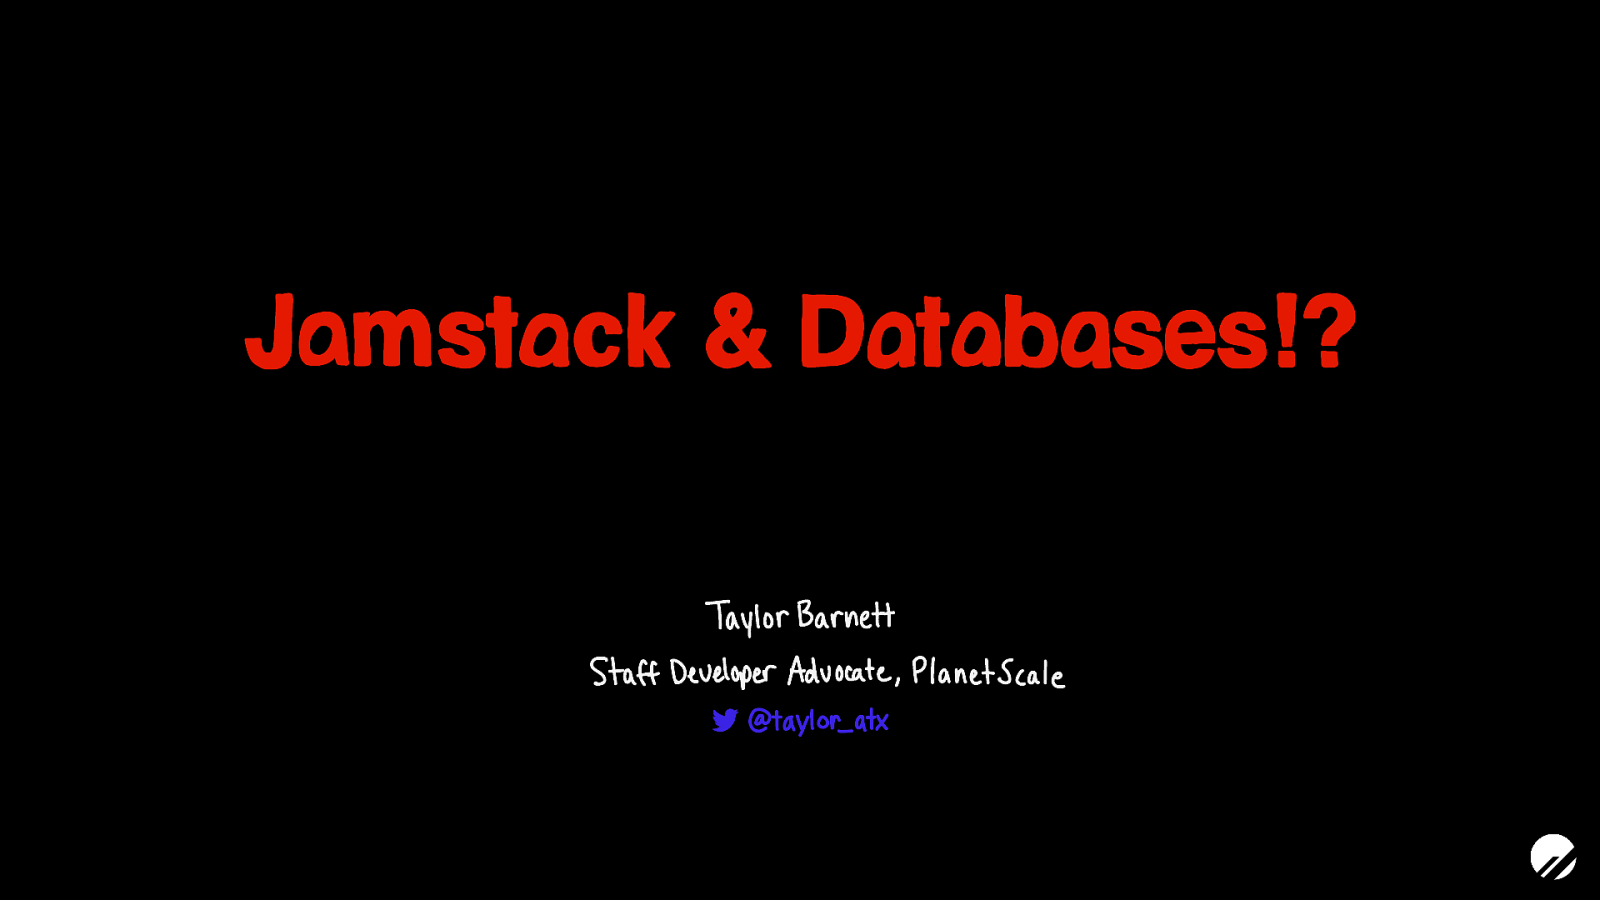 Jamstack and Databases?! by Taylor Barnett